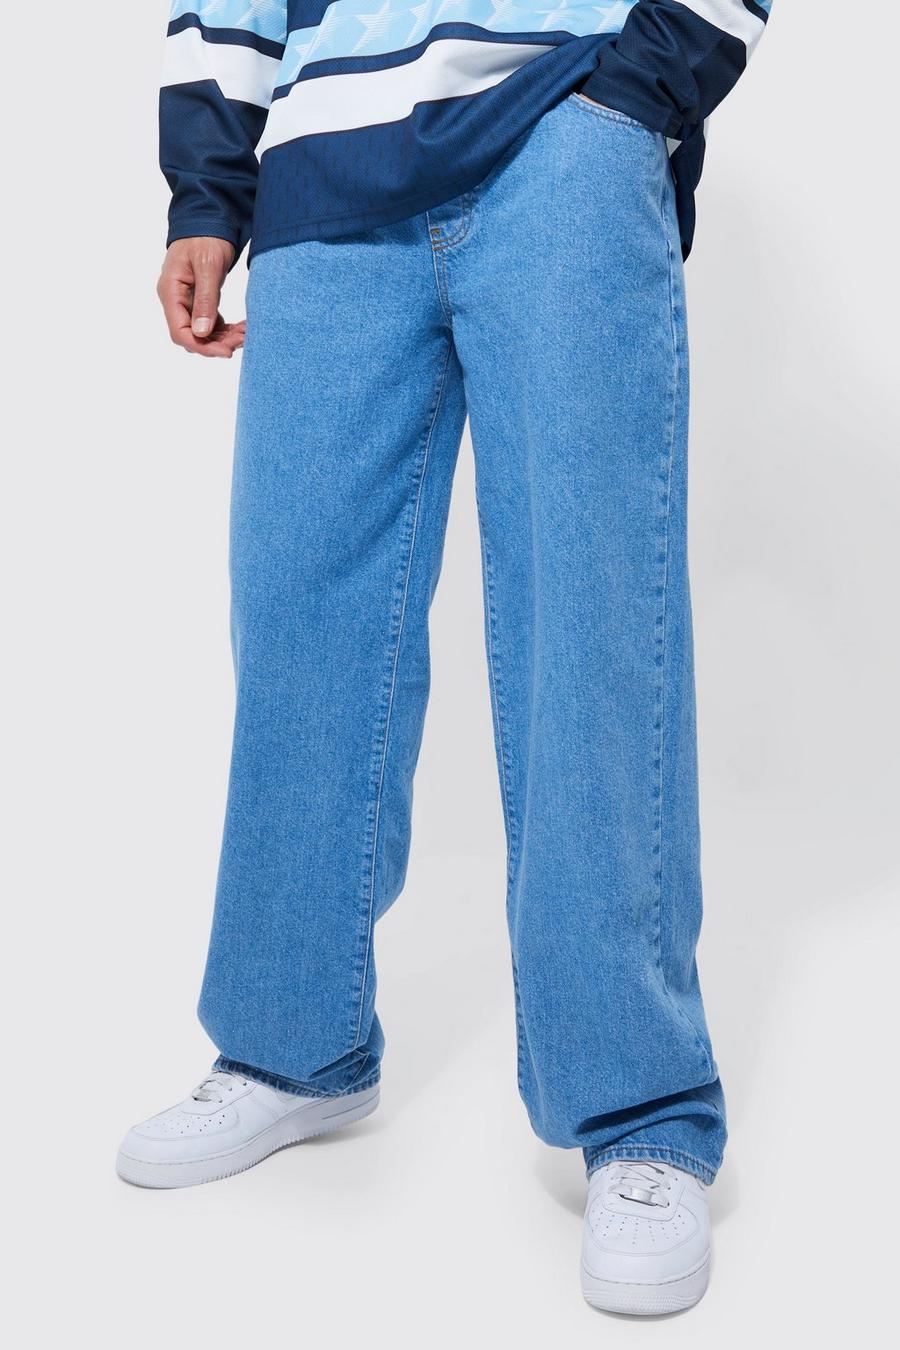 Men's Tall Baggy Fit Drawstring Jeans